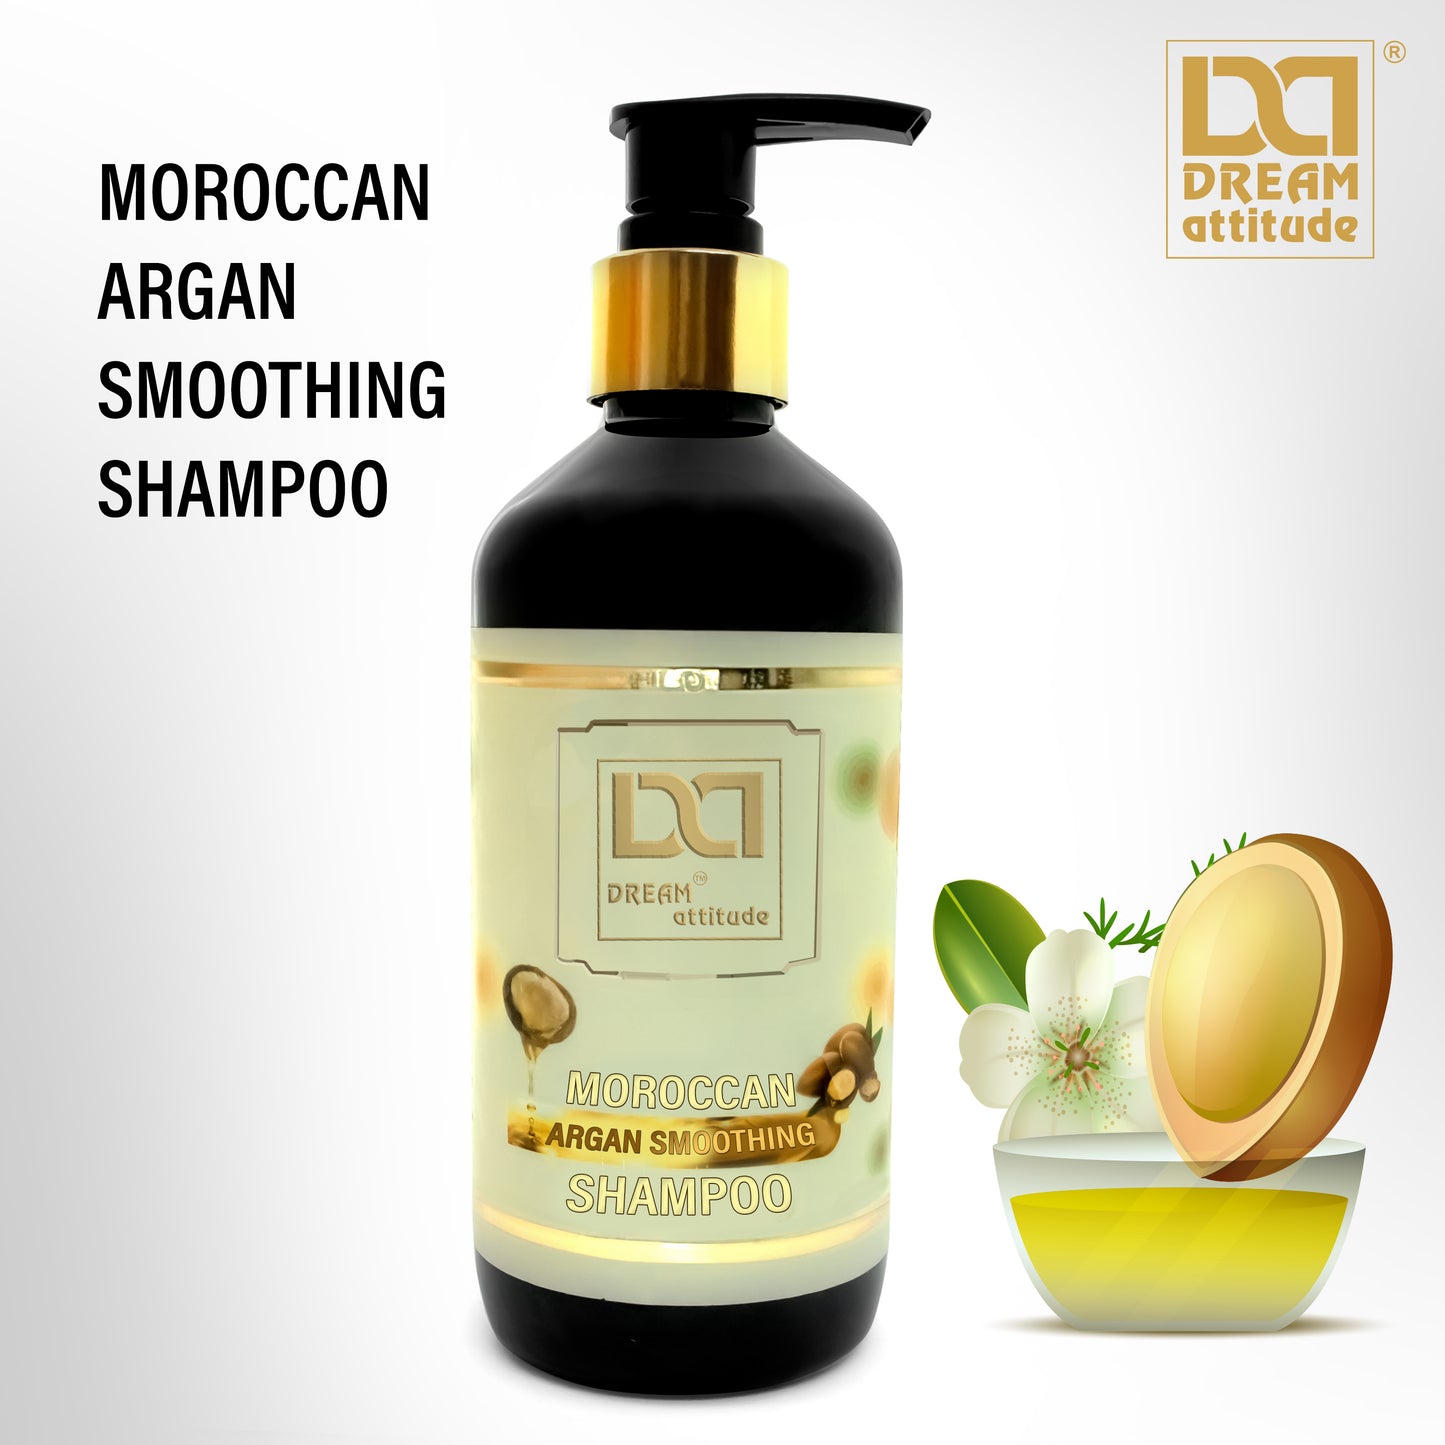 Dream Attitude Moroccan Argan Smoothing Shampoo - Natural Luxury for Your Hair [500ml]